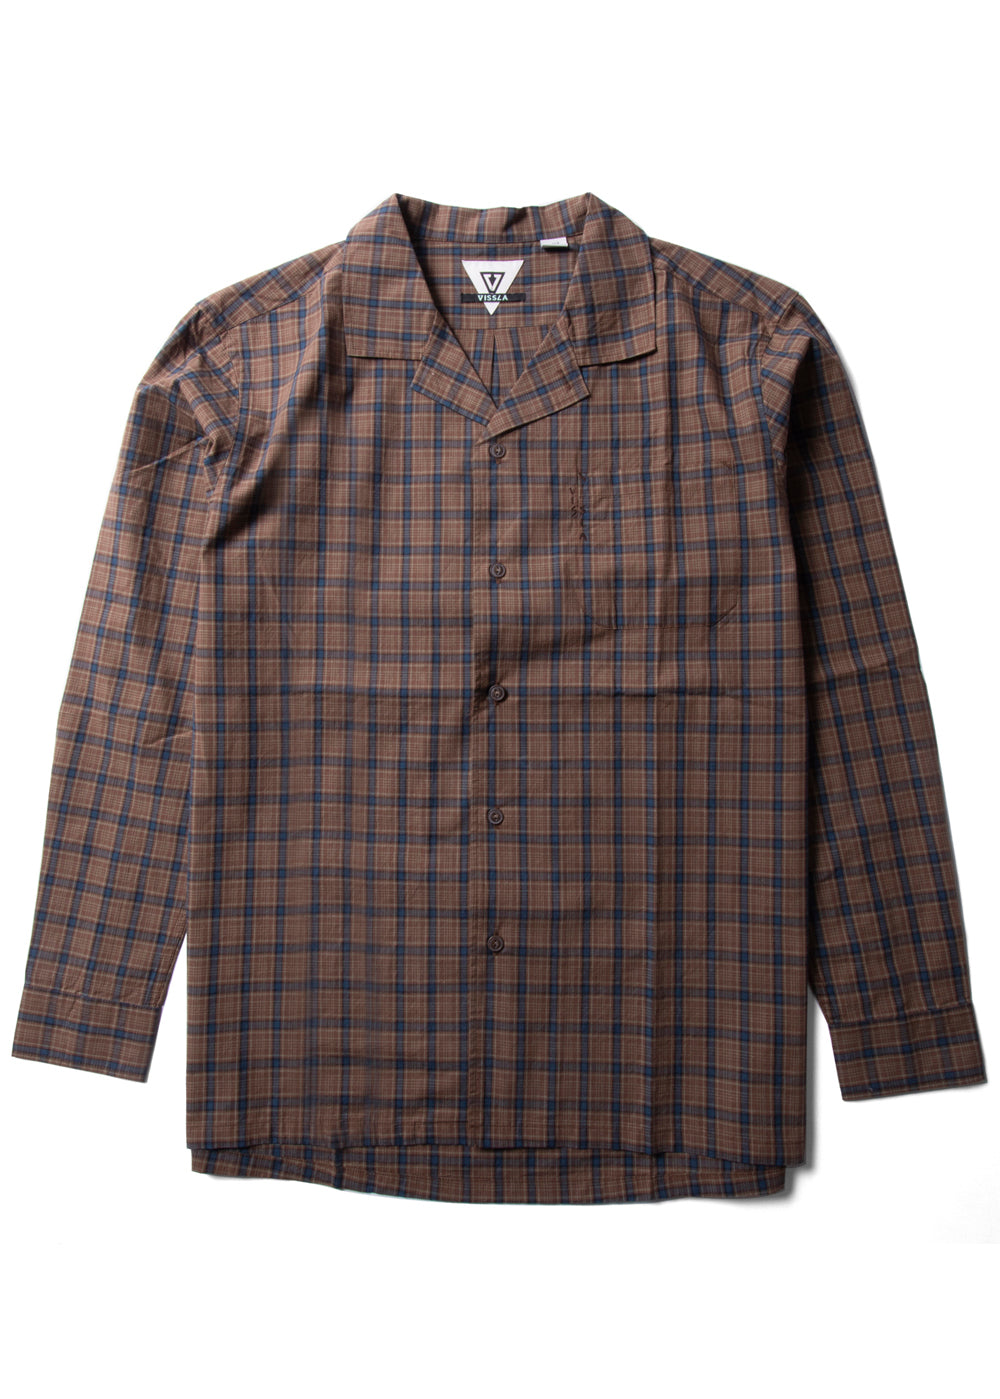 Undefined Lines Eco Shirt - CHOCOLATE